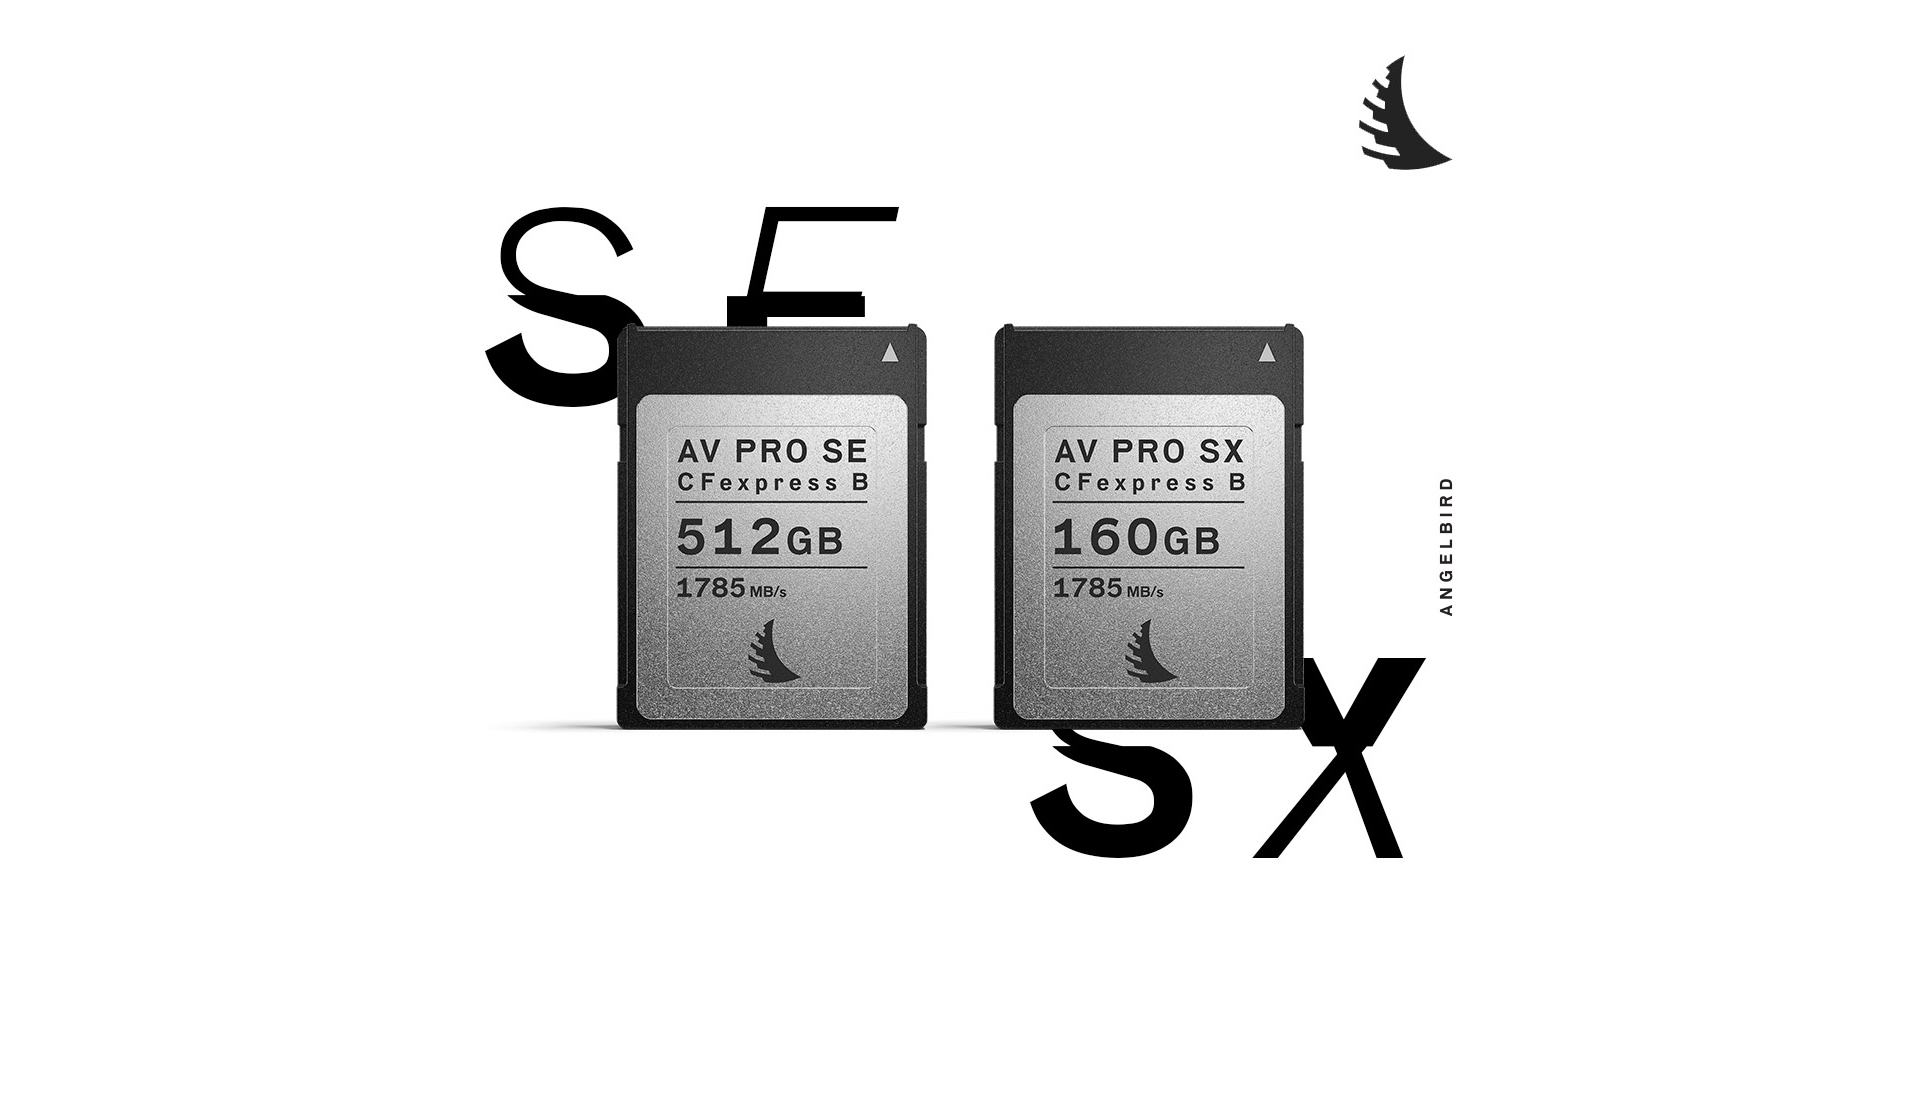 Introducing new Angelbird CFexpress SE and SX cards